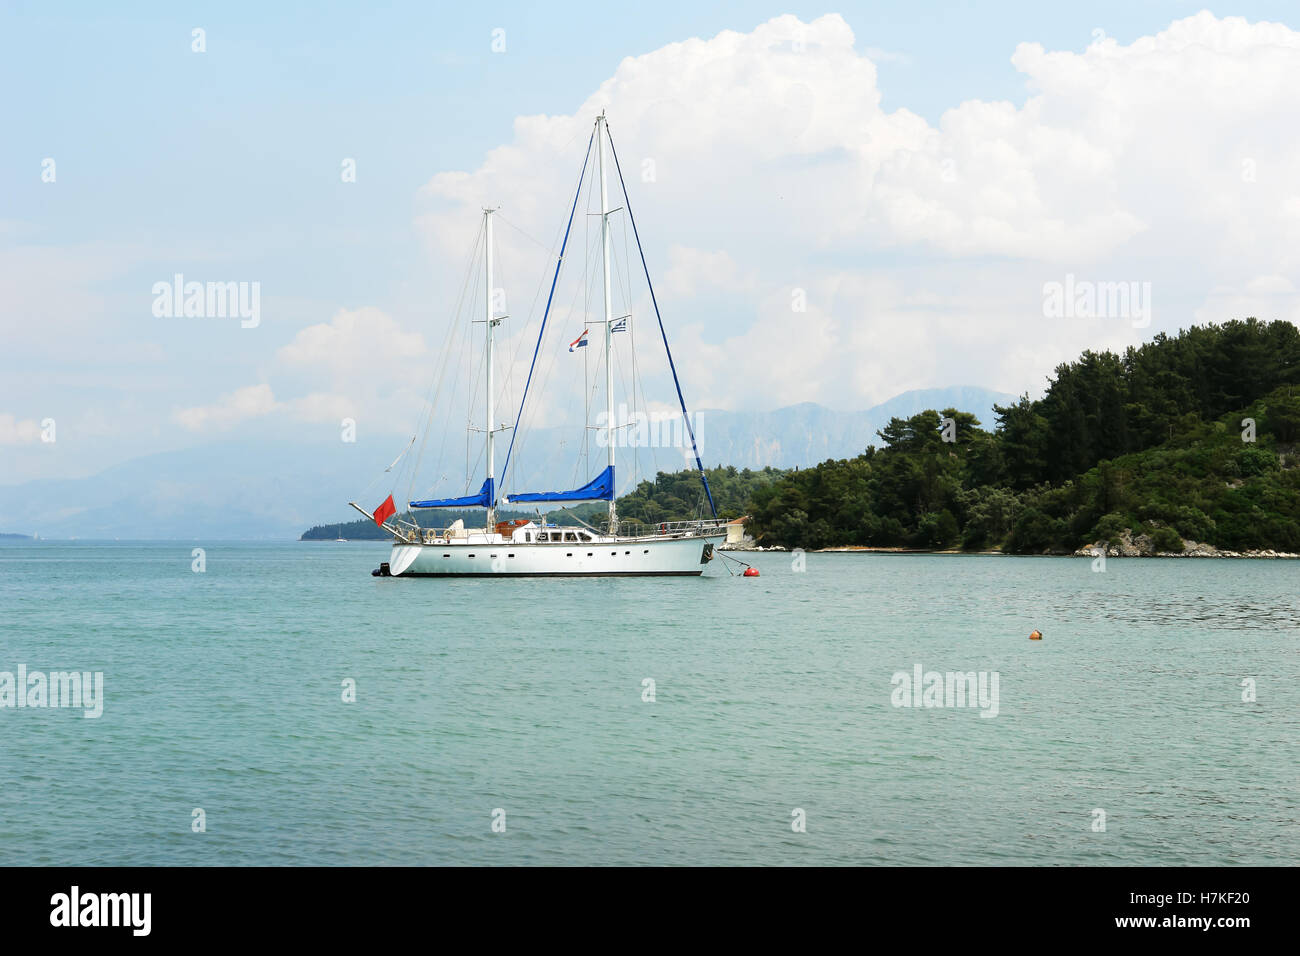 Nidri, GREECE, May 11, 2013: Landscape with green island, mountains and yacht in Ionian sea, Greece. Stock Photo